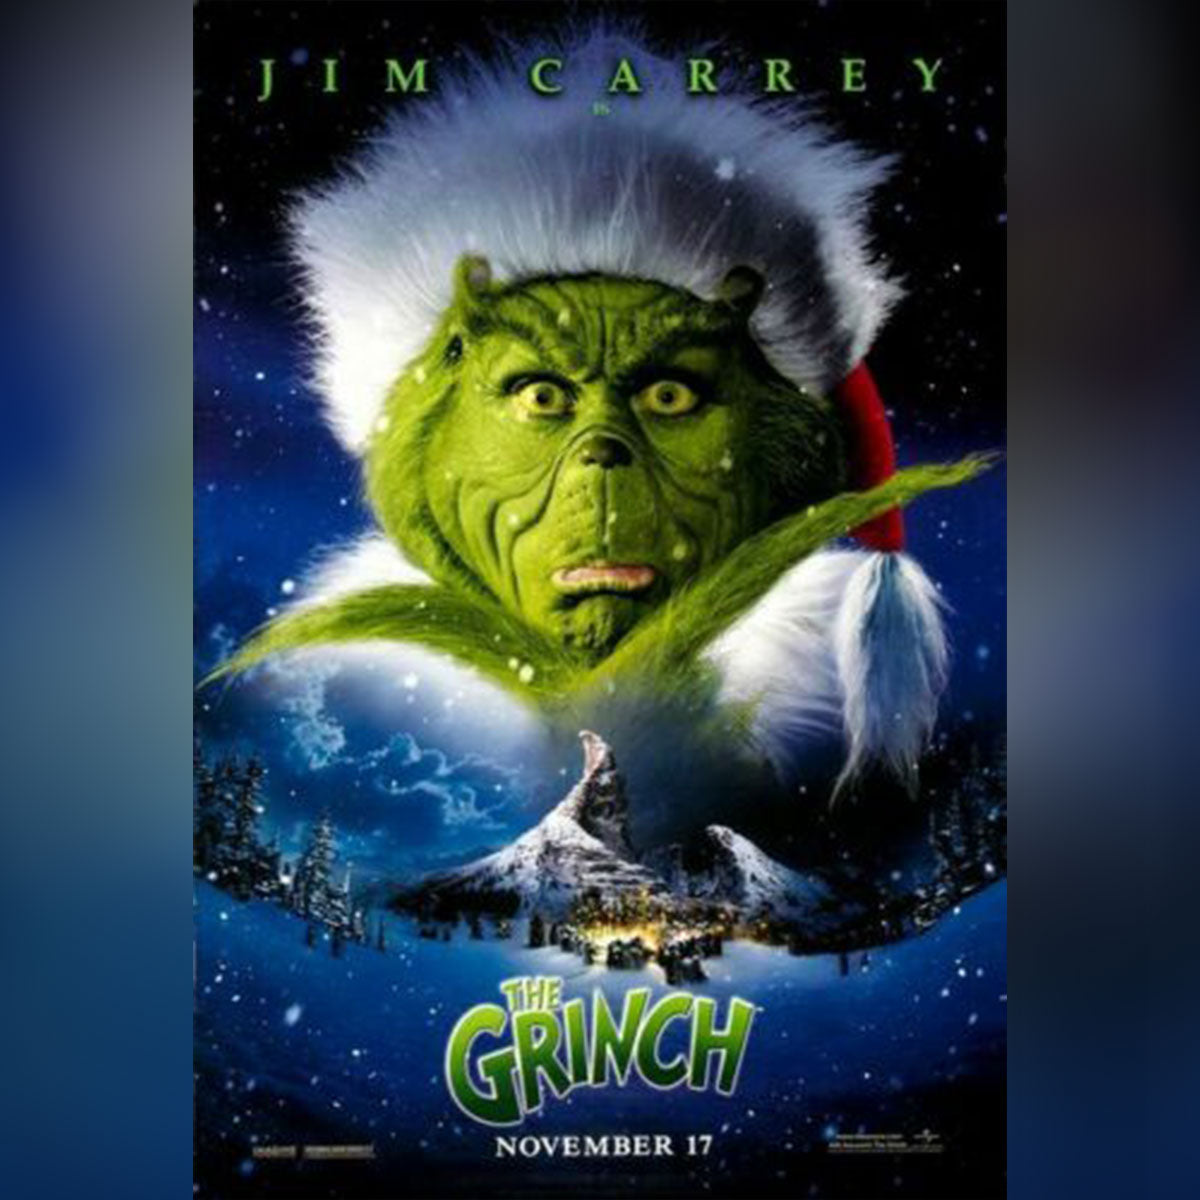 Grinch, The (2000)